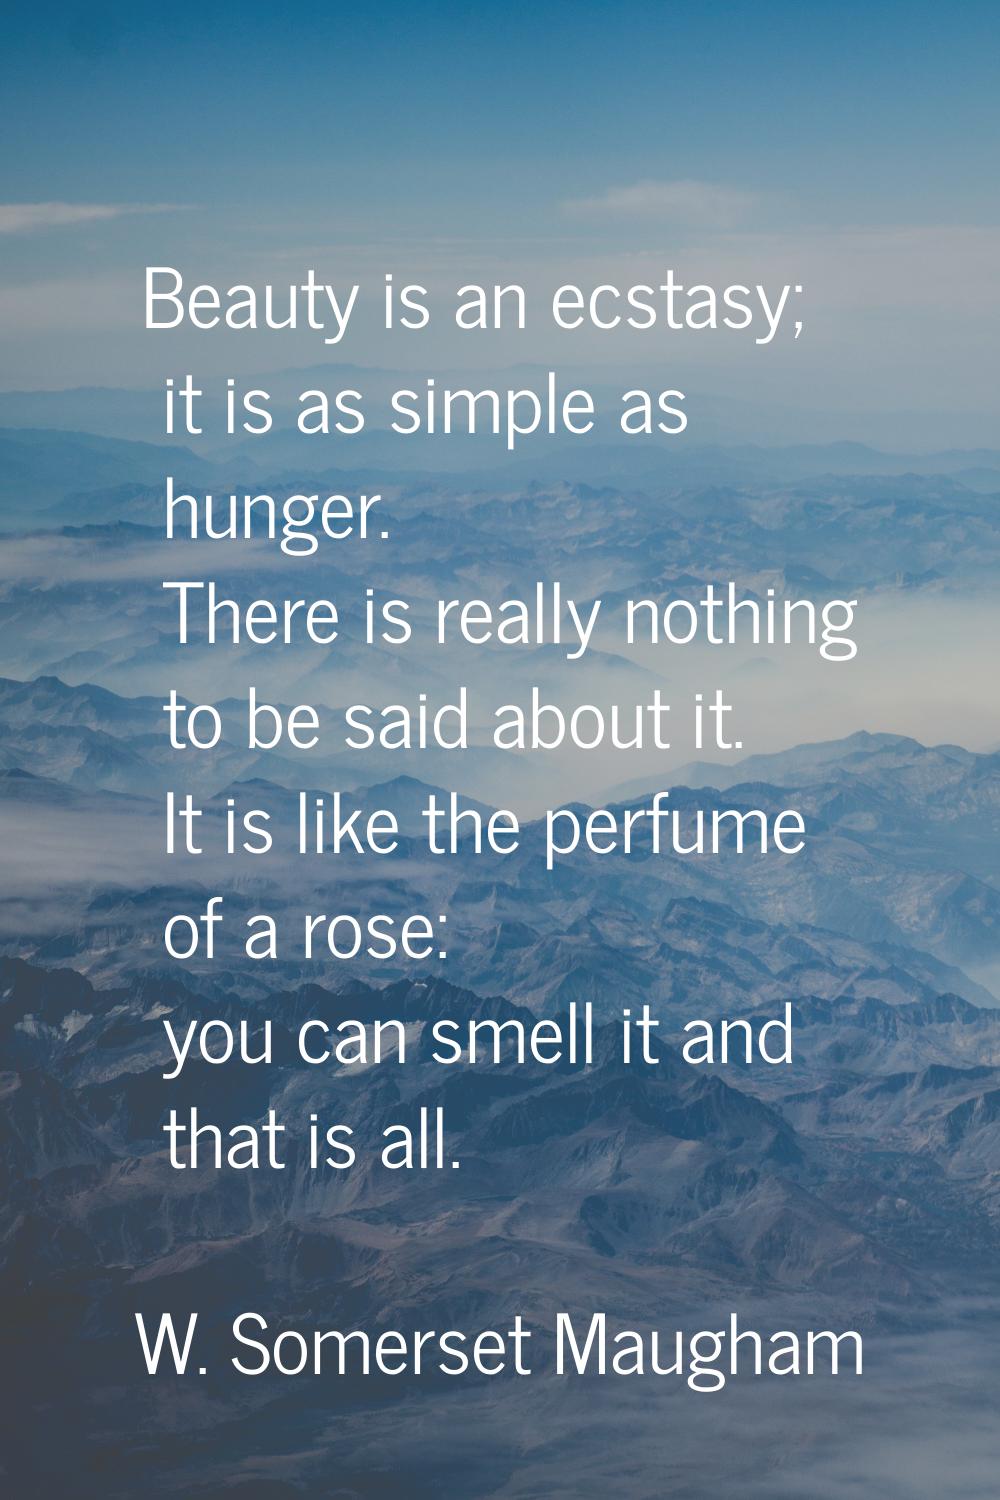 Beauty is an ecstasy; it is as simple as hunger. There is really nothing to be said about it. It is